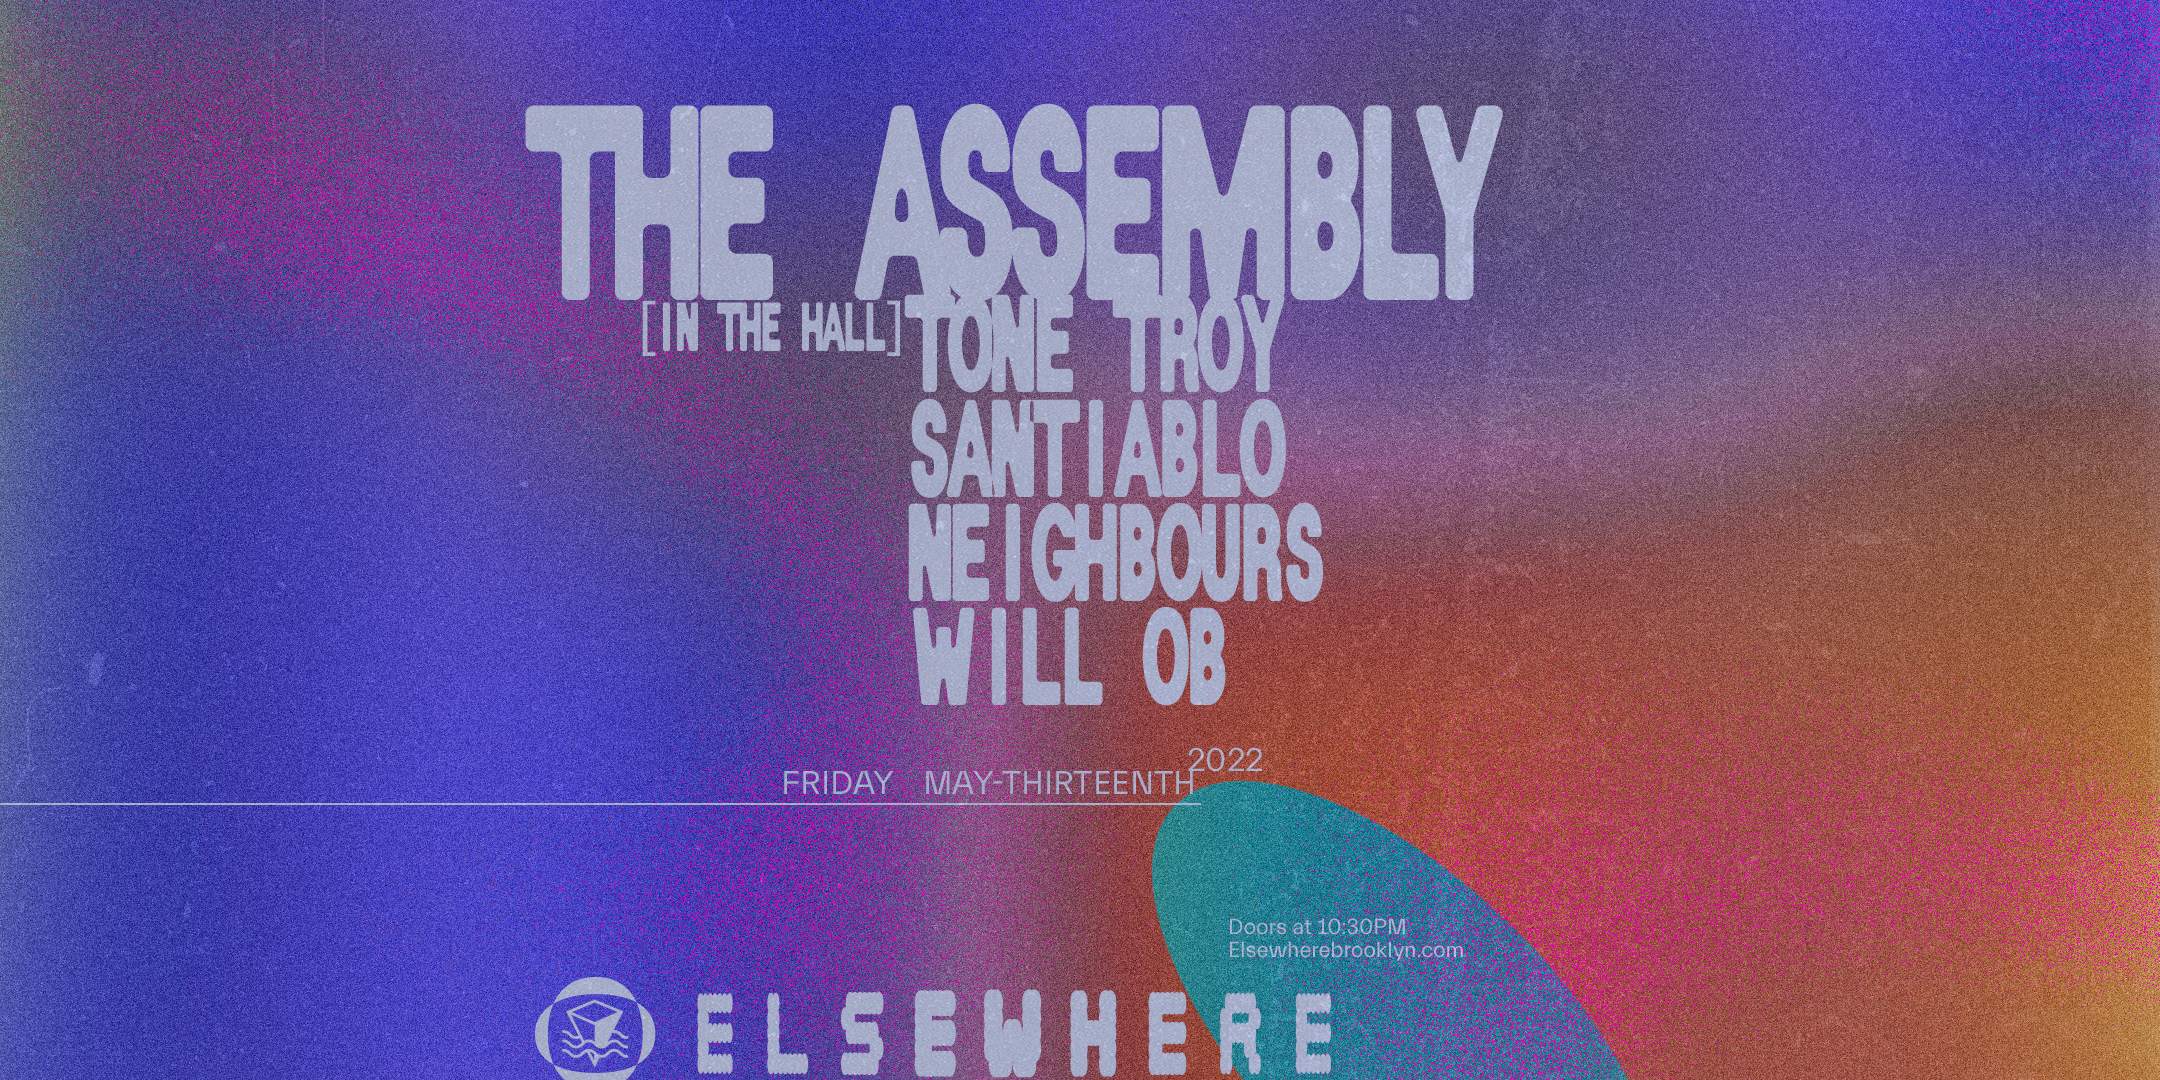 The Assembly with Tone Troy, santiablo, NEIGHBOURS, Will OB - Página frontal